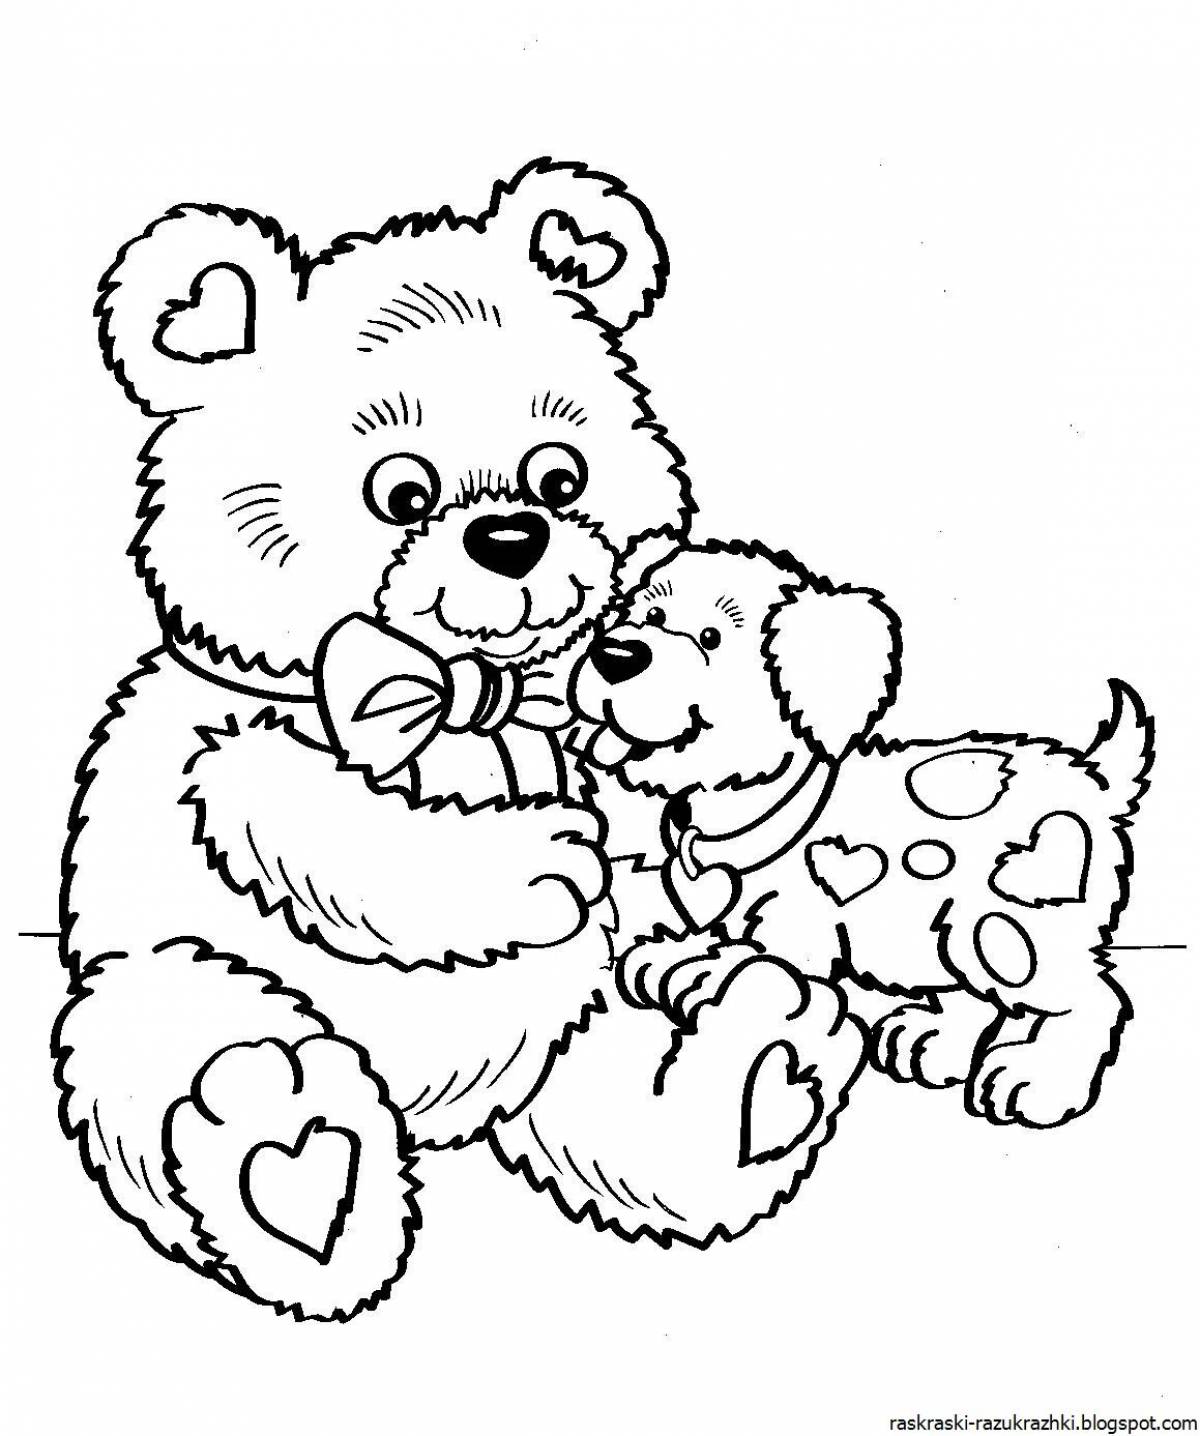 Funny teddy bear coloring book for 5-6 year olds